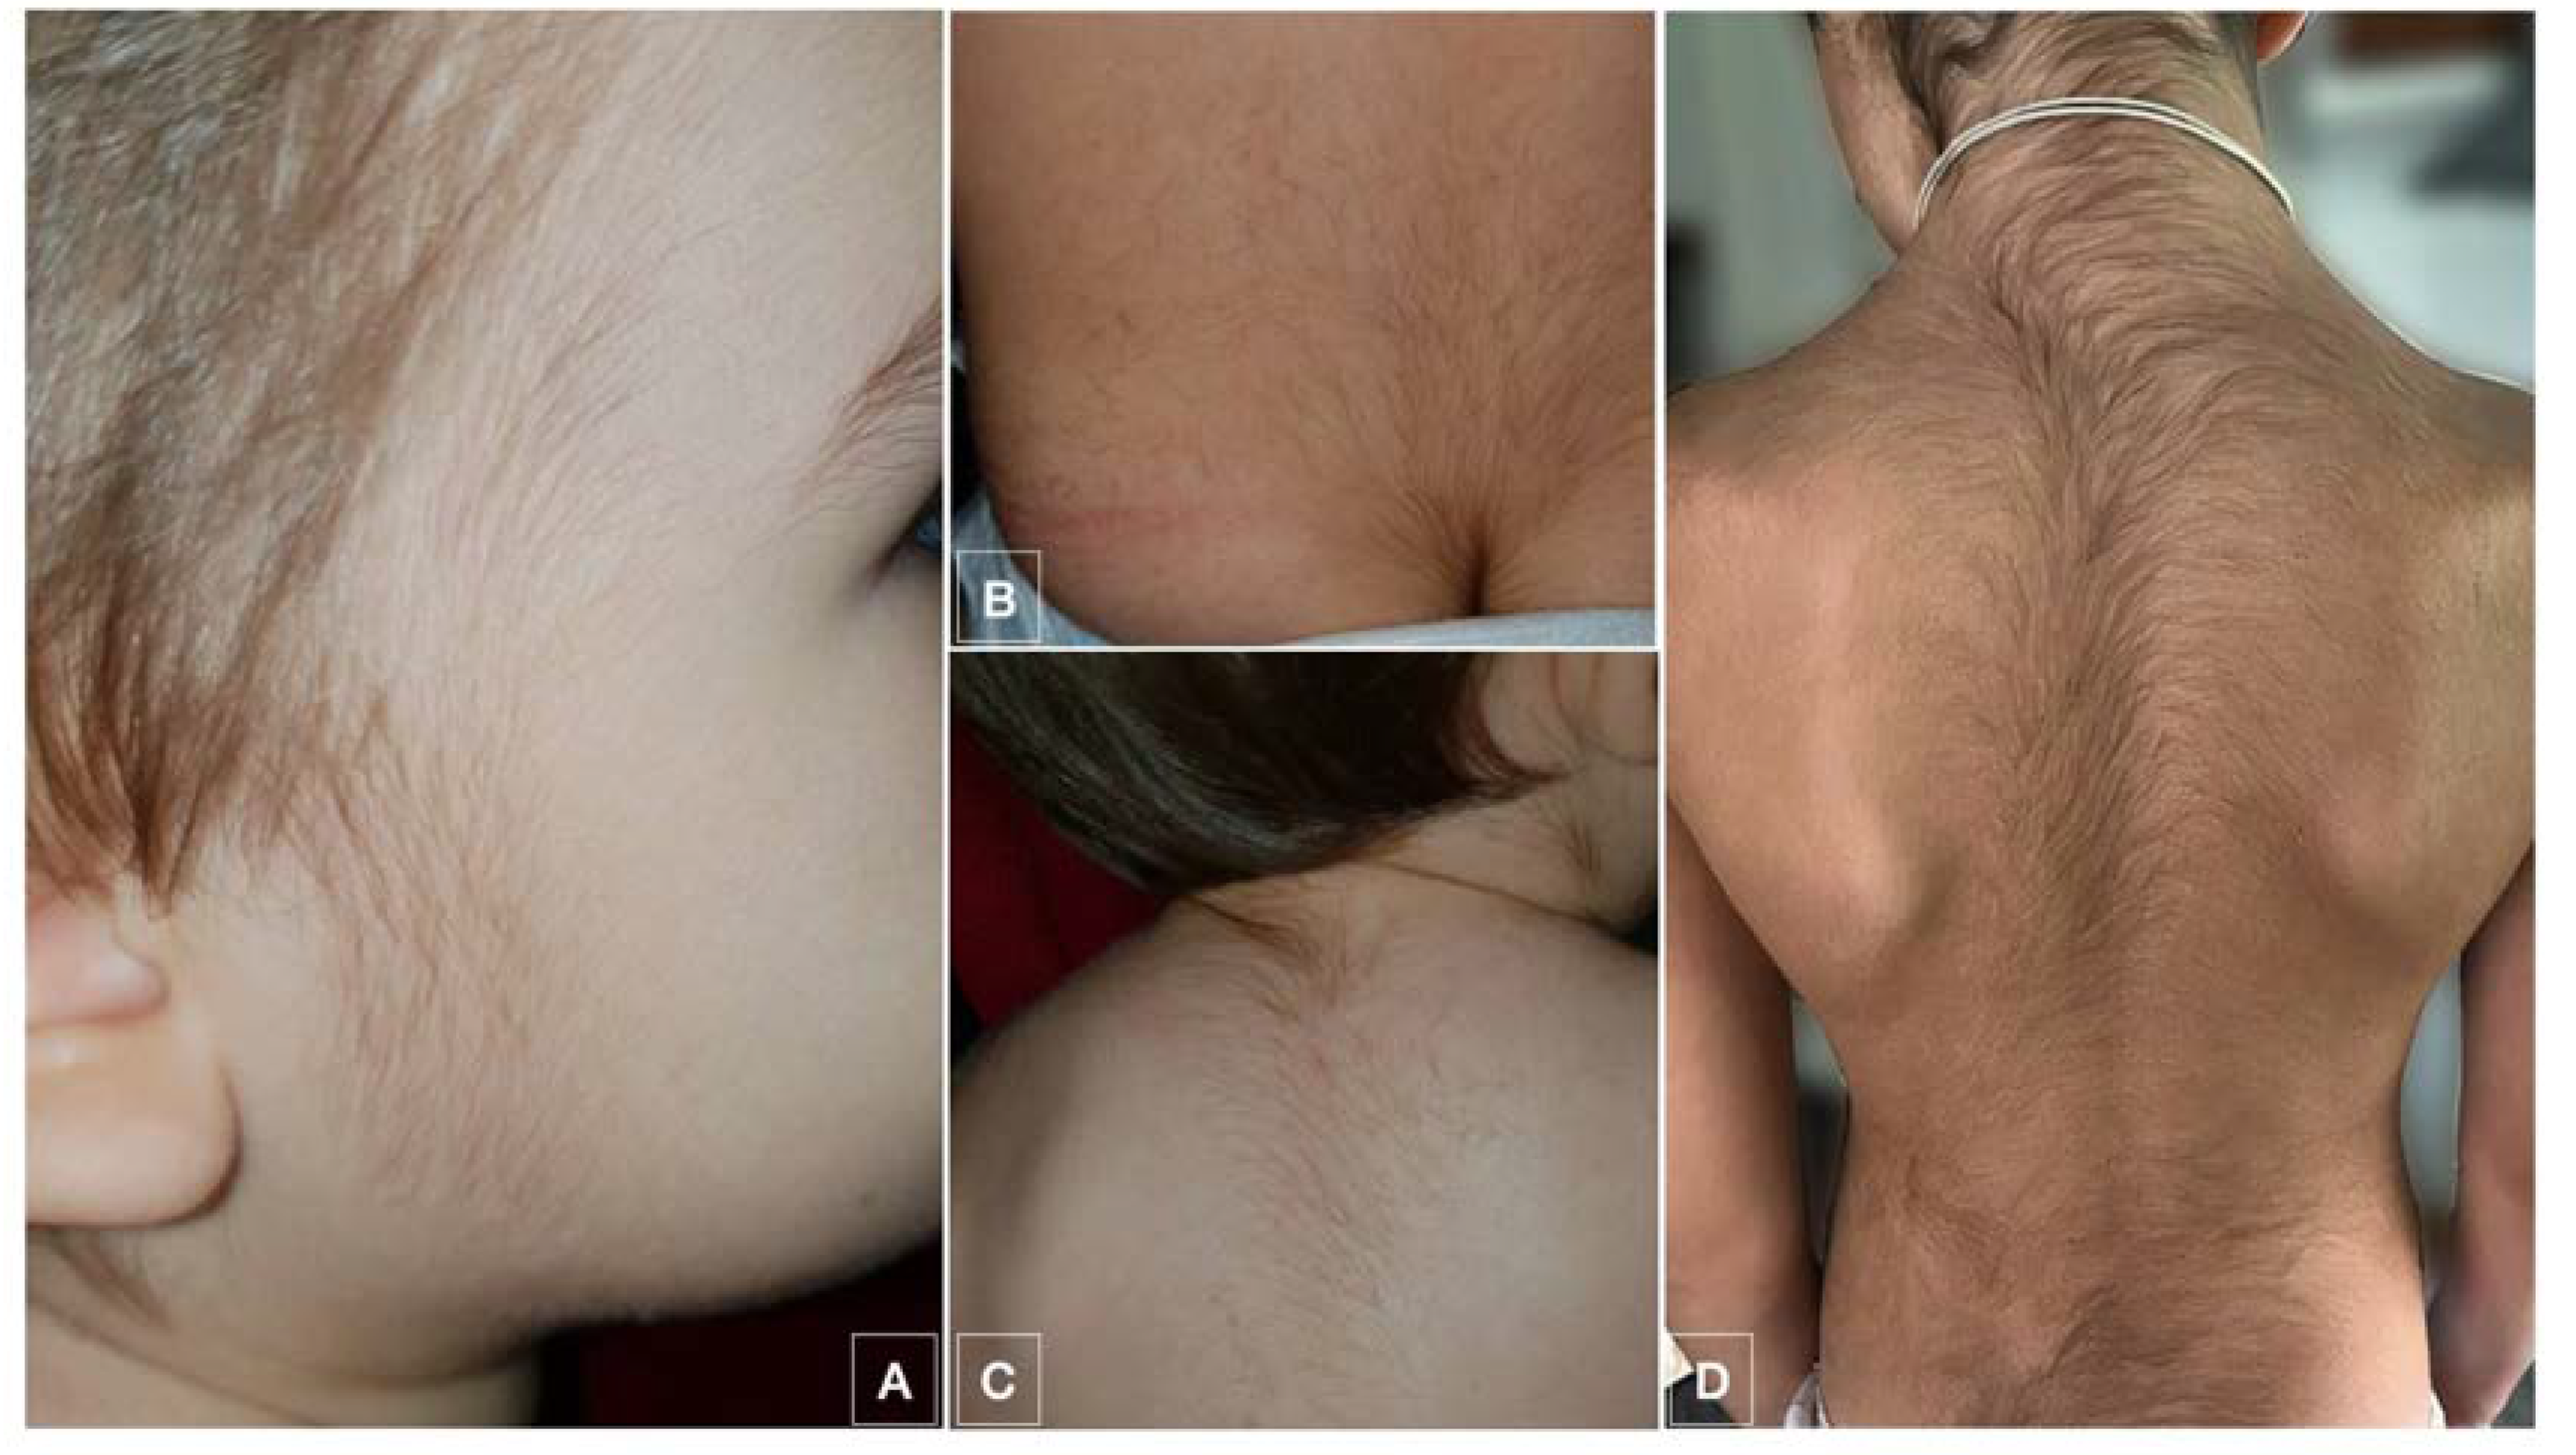 JCM | Free Full-Text | Systemic Minoxidil Accidental Exposure in a Paediatric Population: A Case Series of Cutaneous and Systemic Side Effects